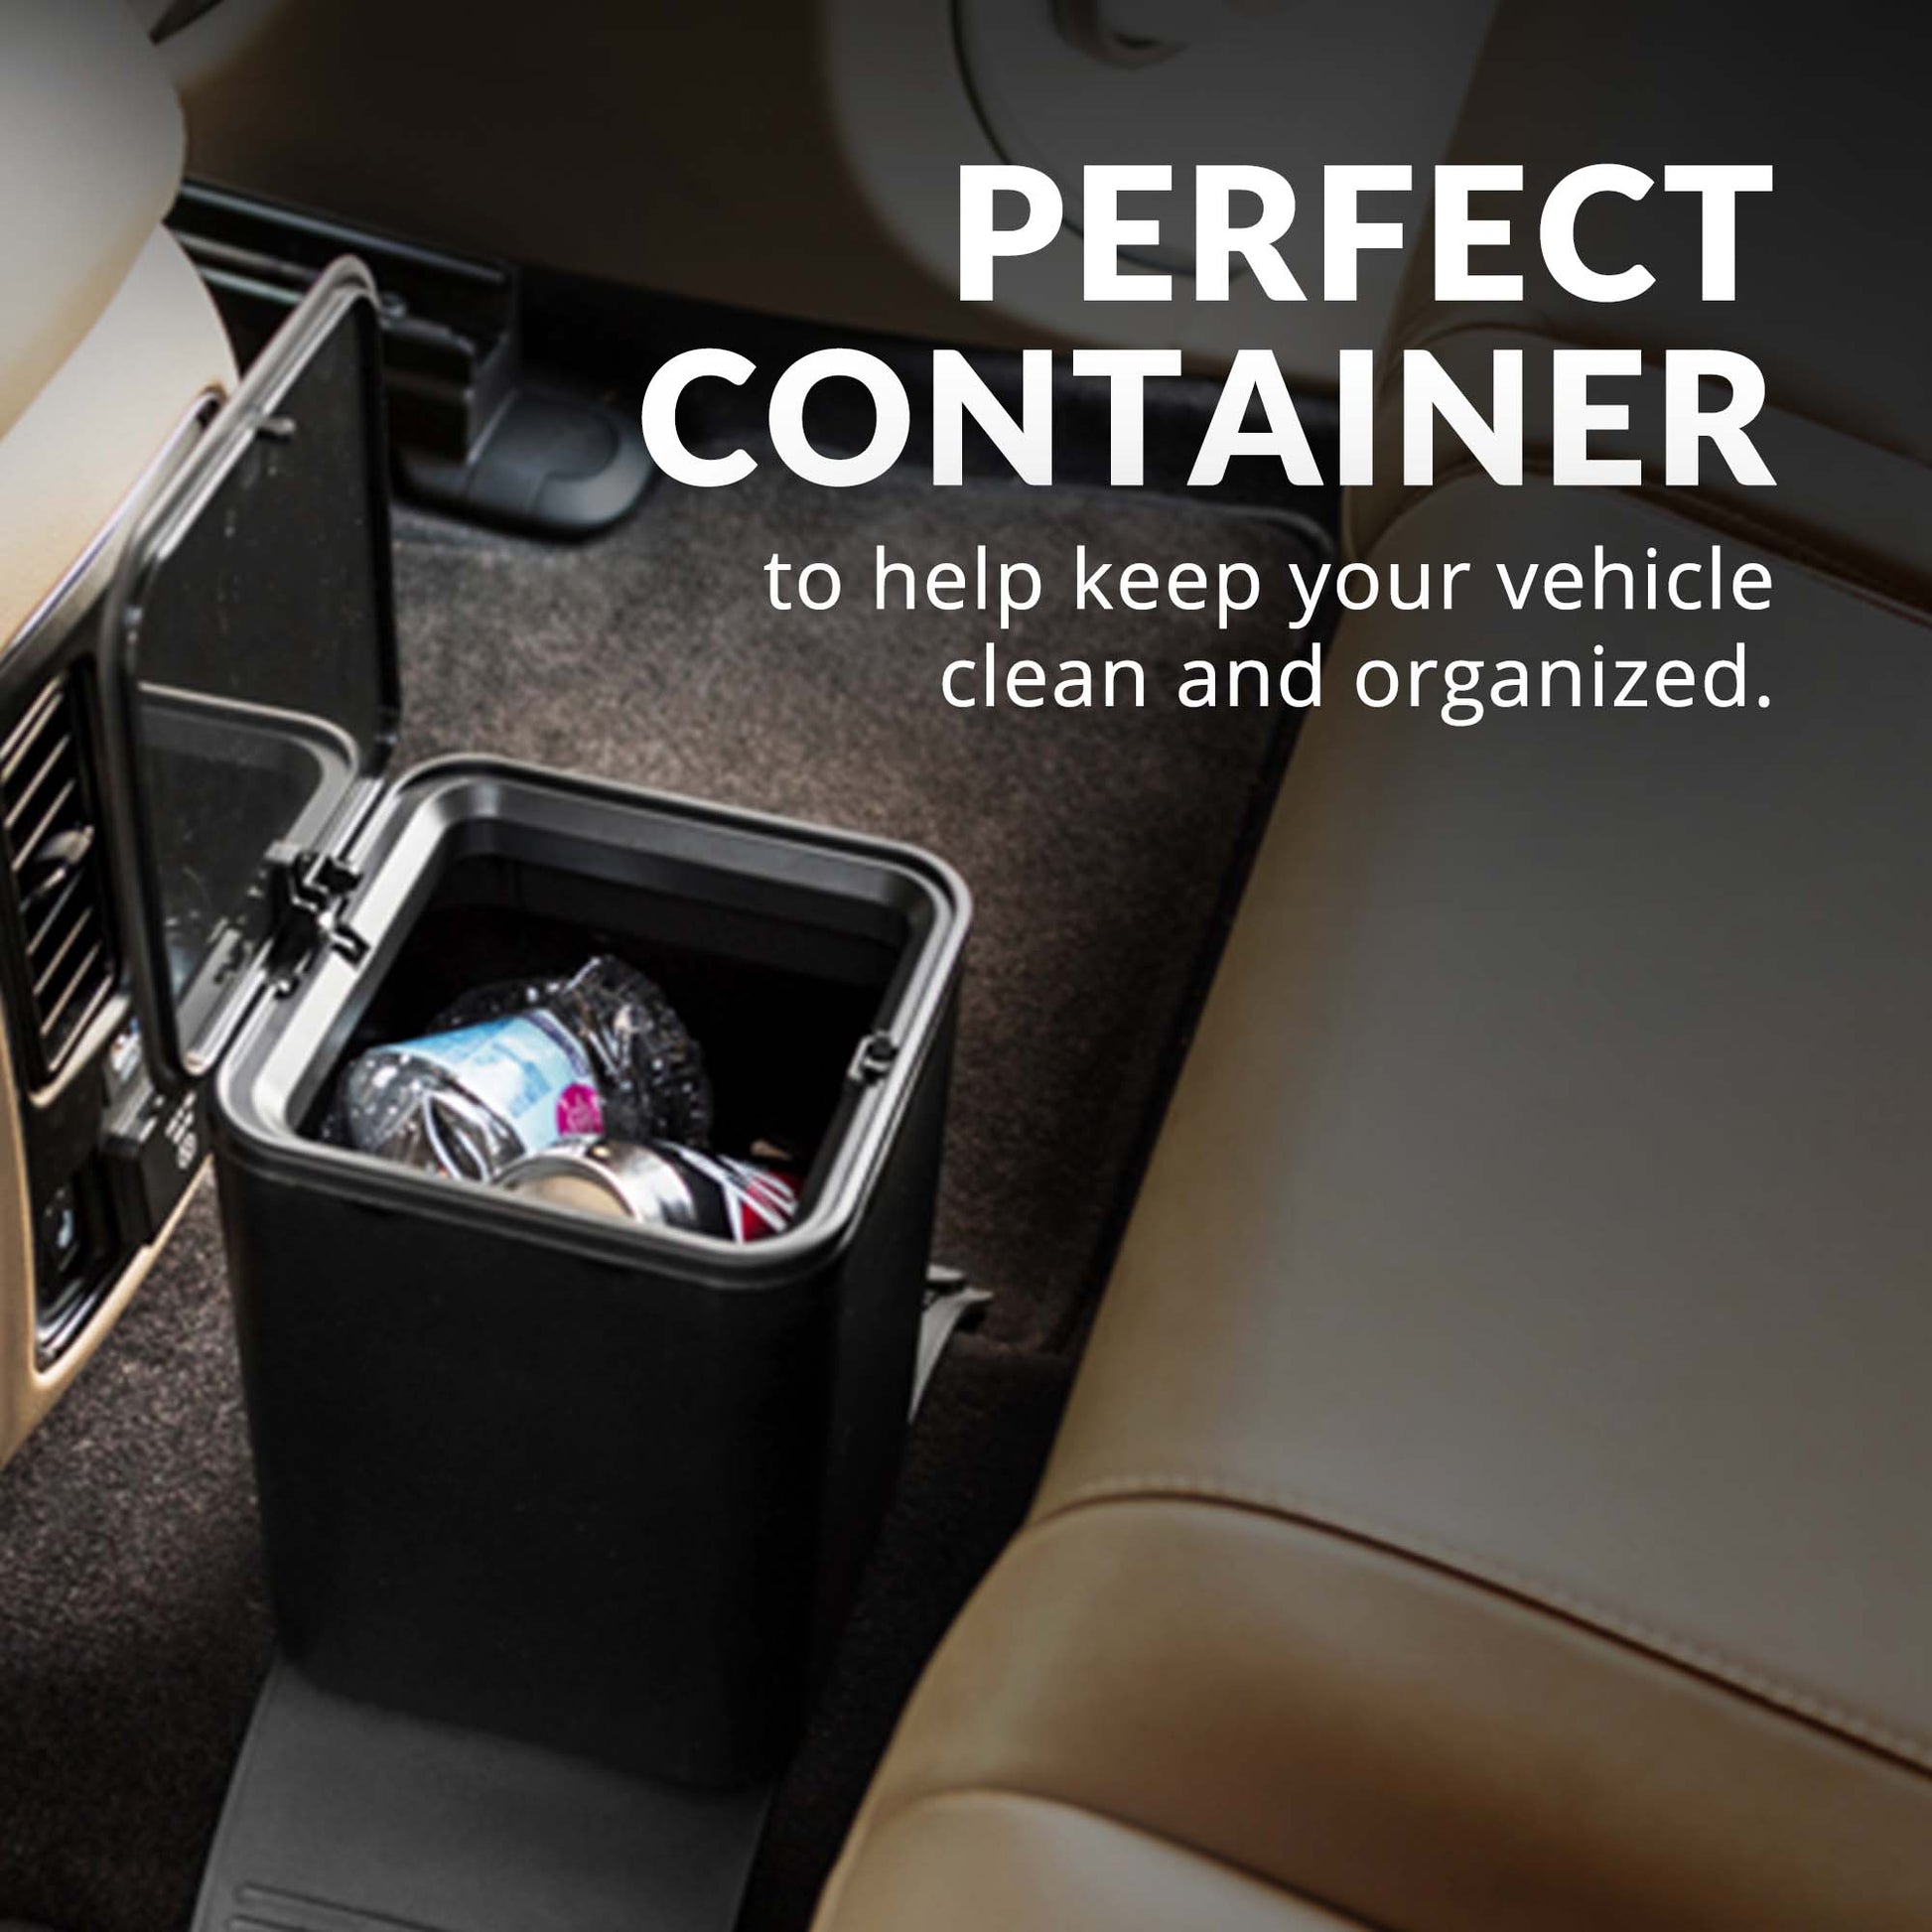 Car Cup Trash Can: Keep Your Vehicle Clean and Organized